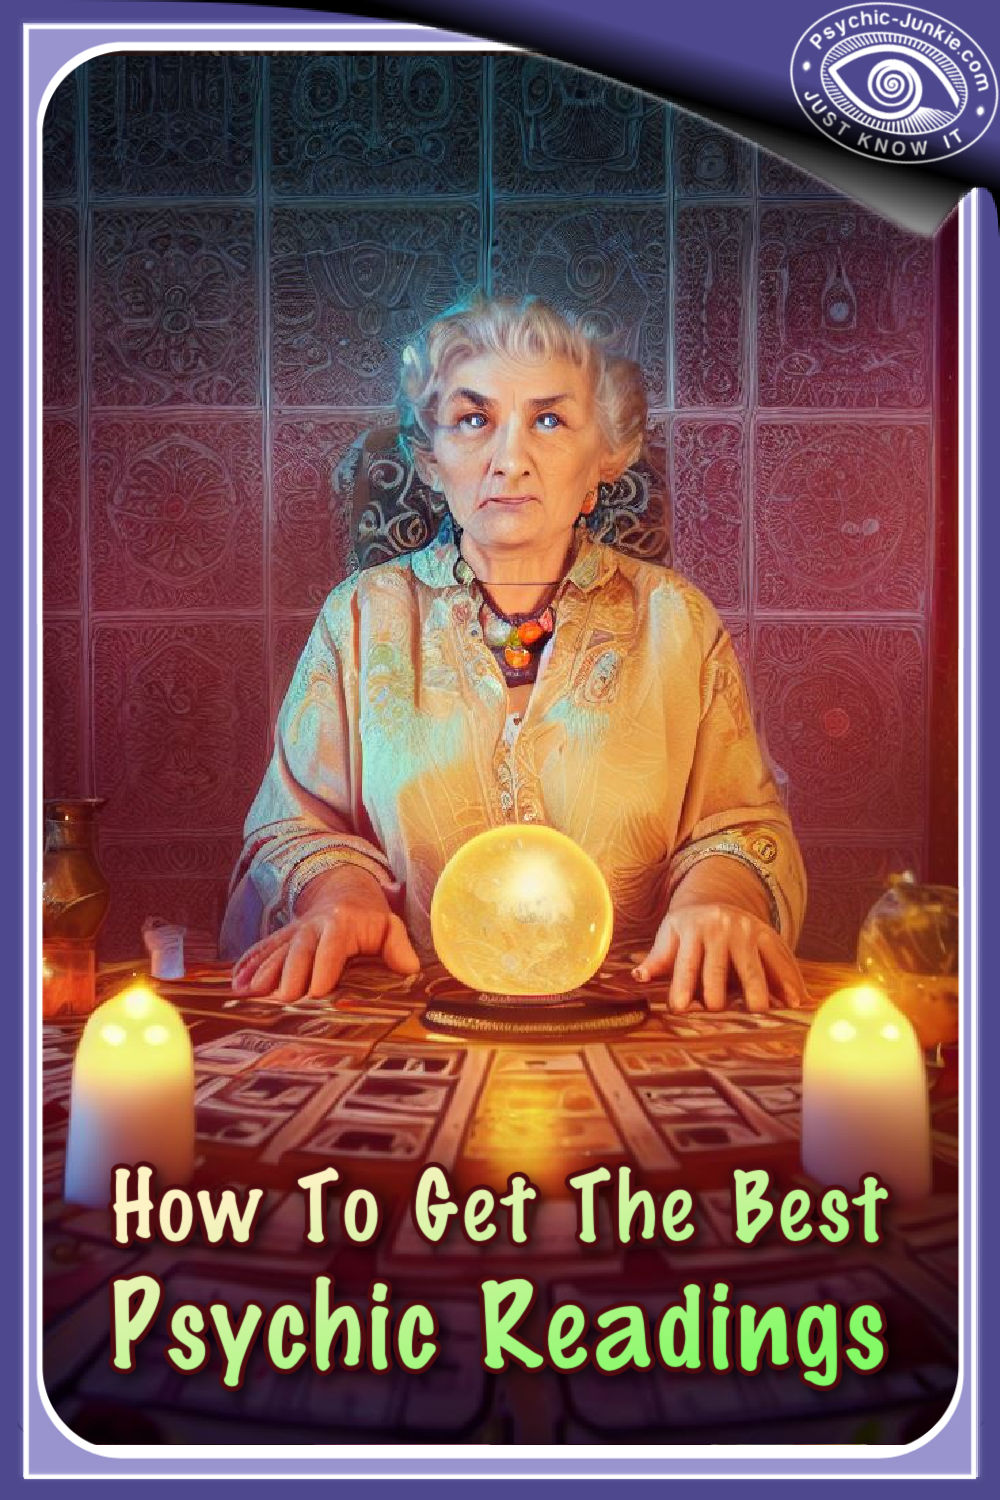 How To Get The Best Psychic Readings